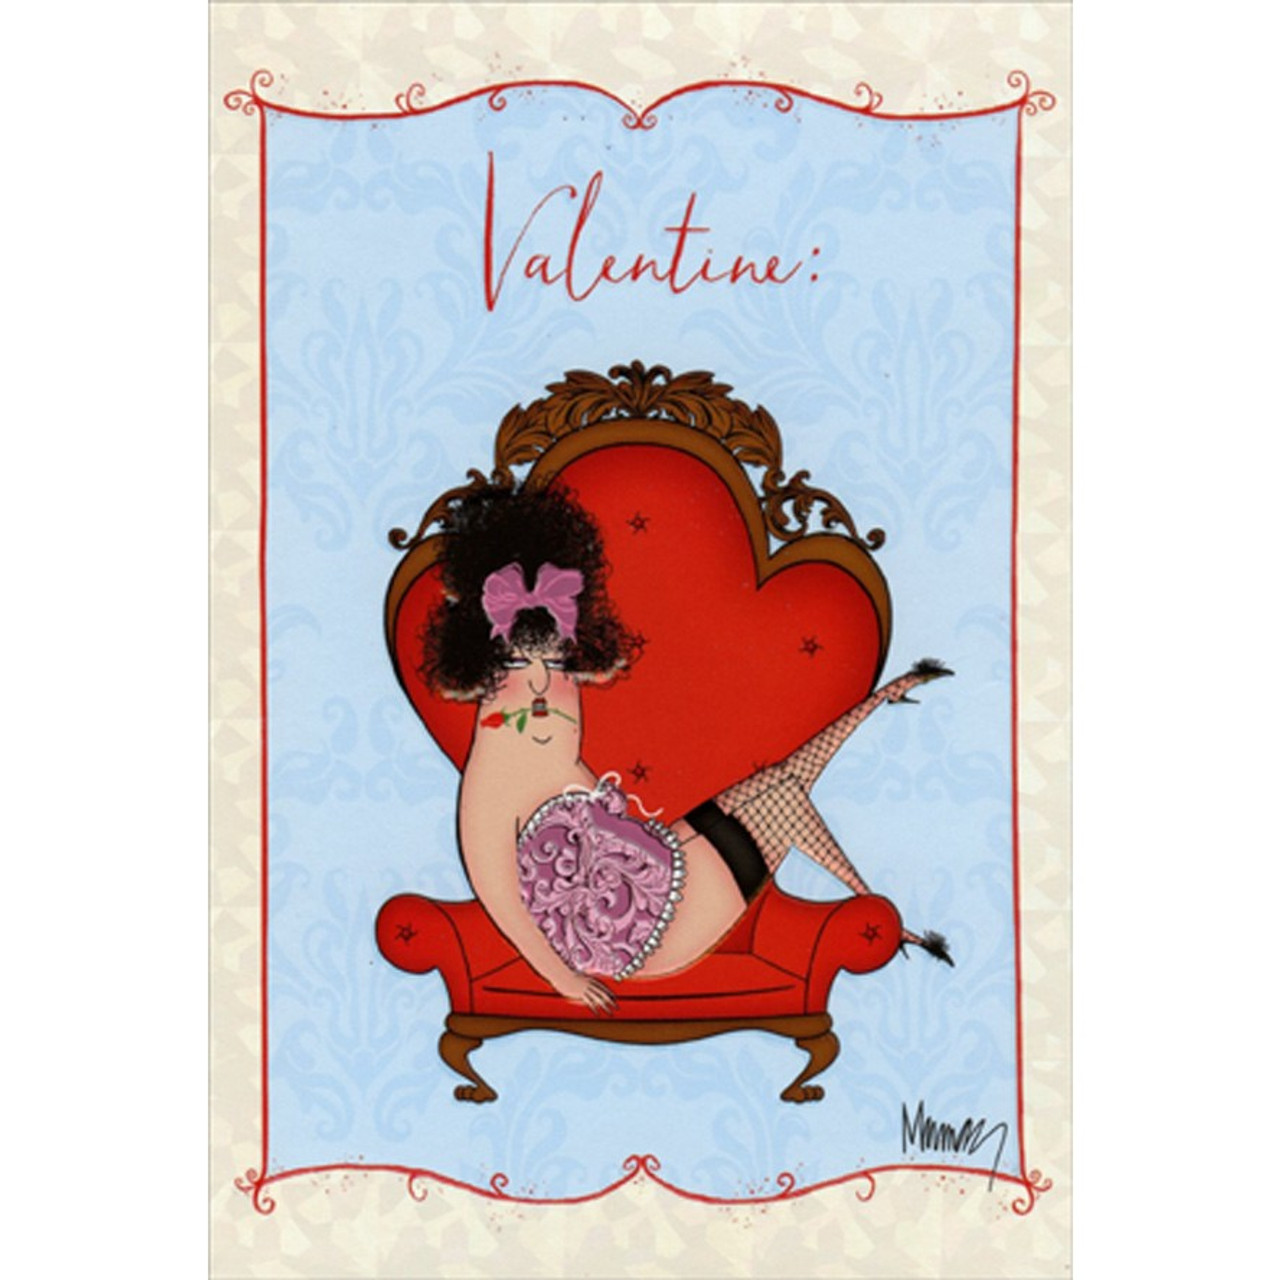 Itchy, Sexy Underwear Woman on Chair Funny / Humorous Valentine's